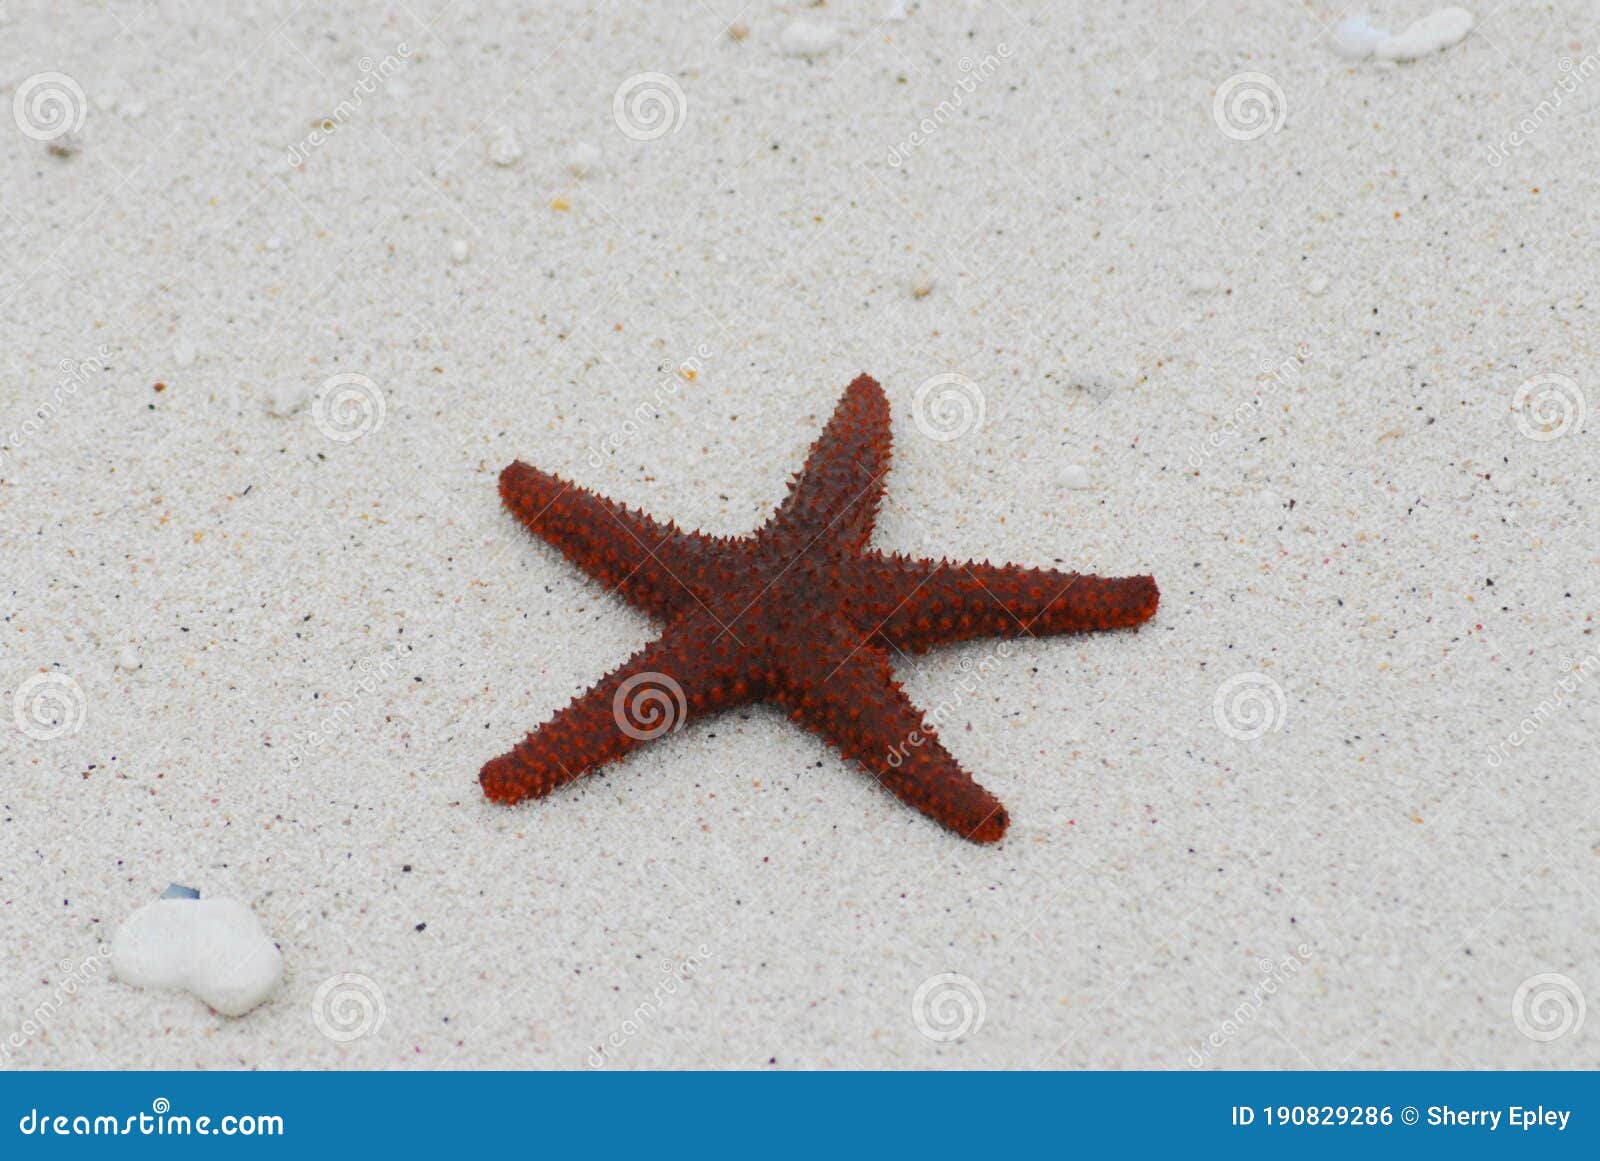 Bahamas- Close Up of a Red Thorny Sea Star on a White Sand Beach Stock  Photo - Image of background, shaped: 190829286